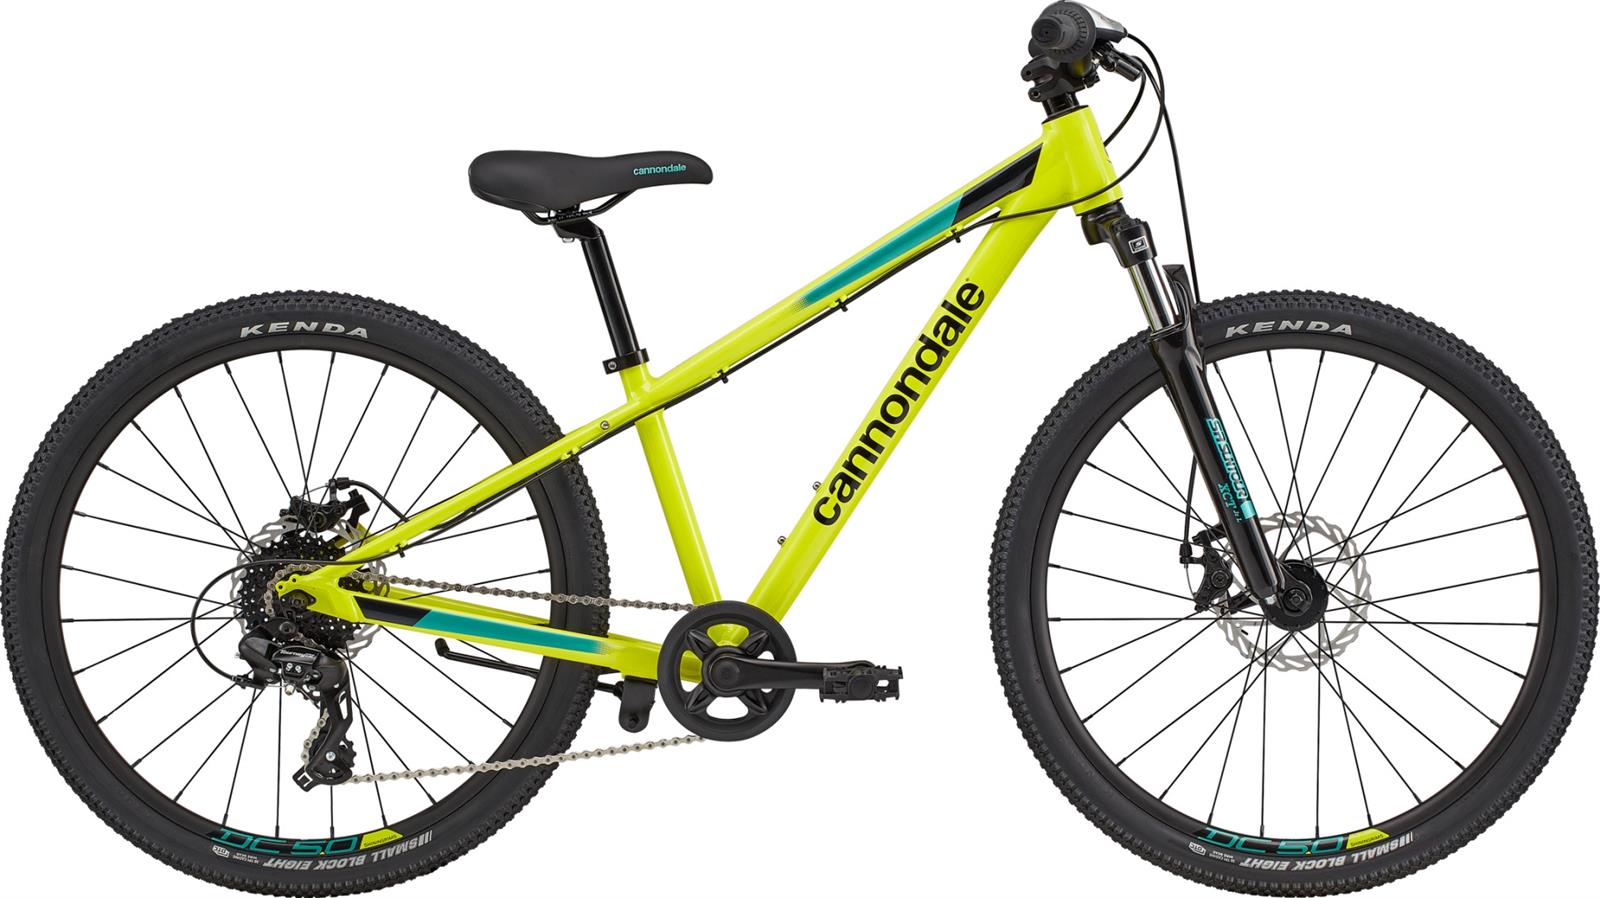 CANNONDALE Trail 24" Girls (2020)